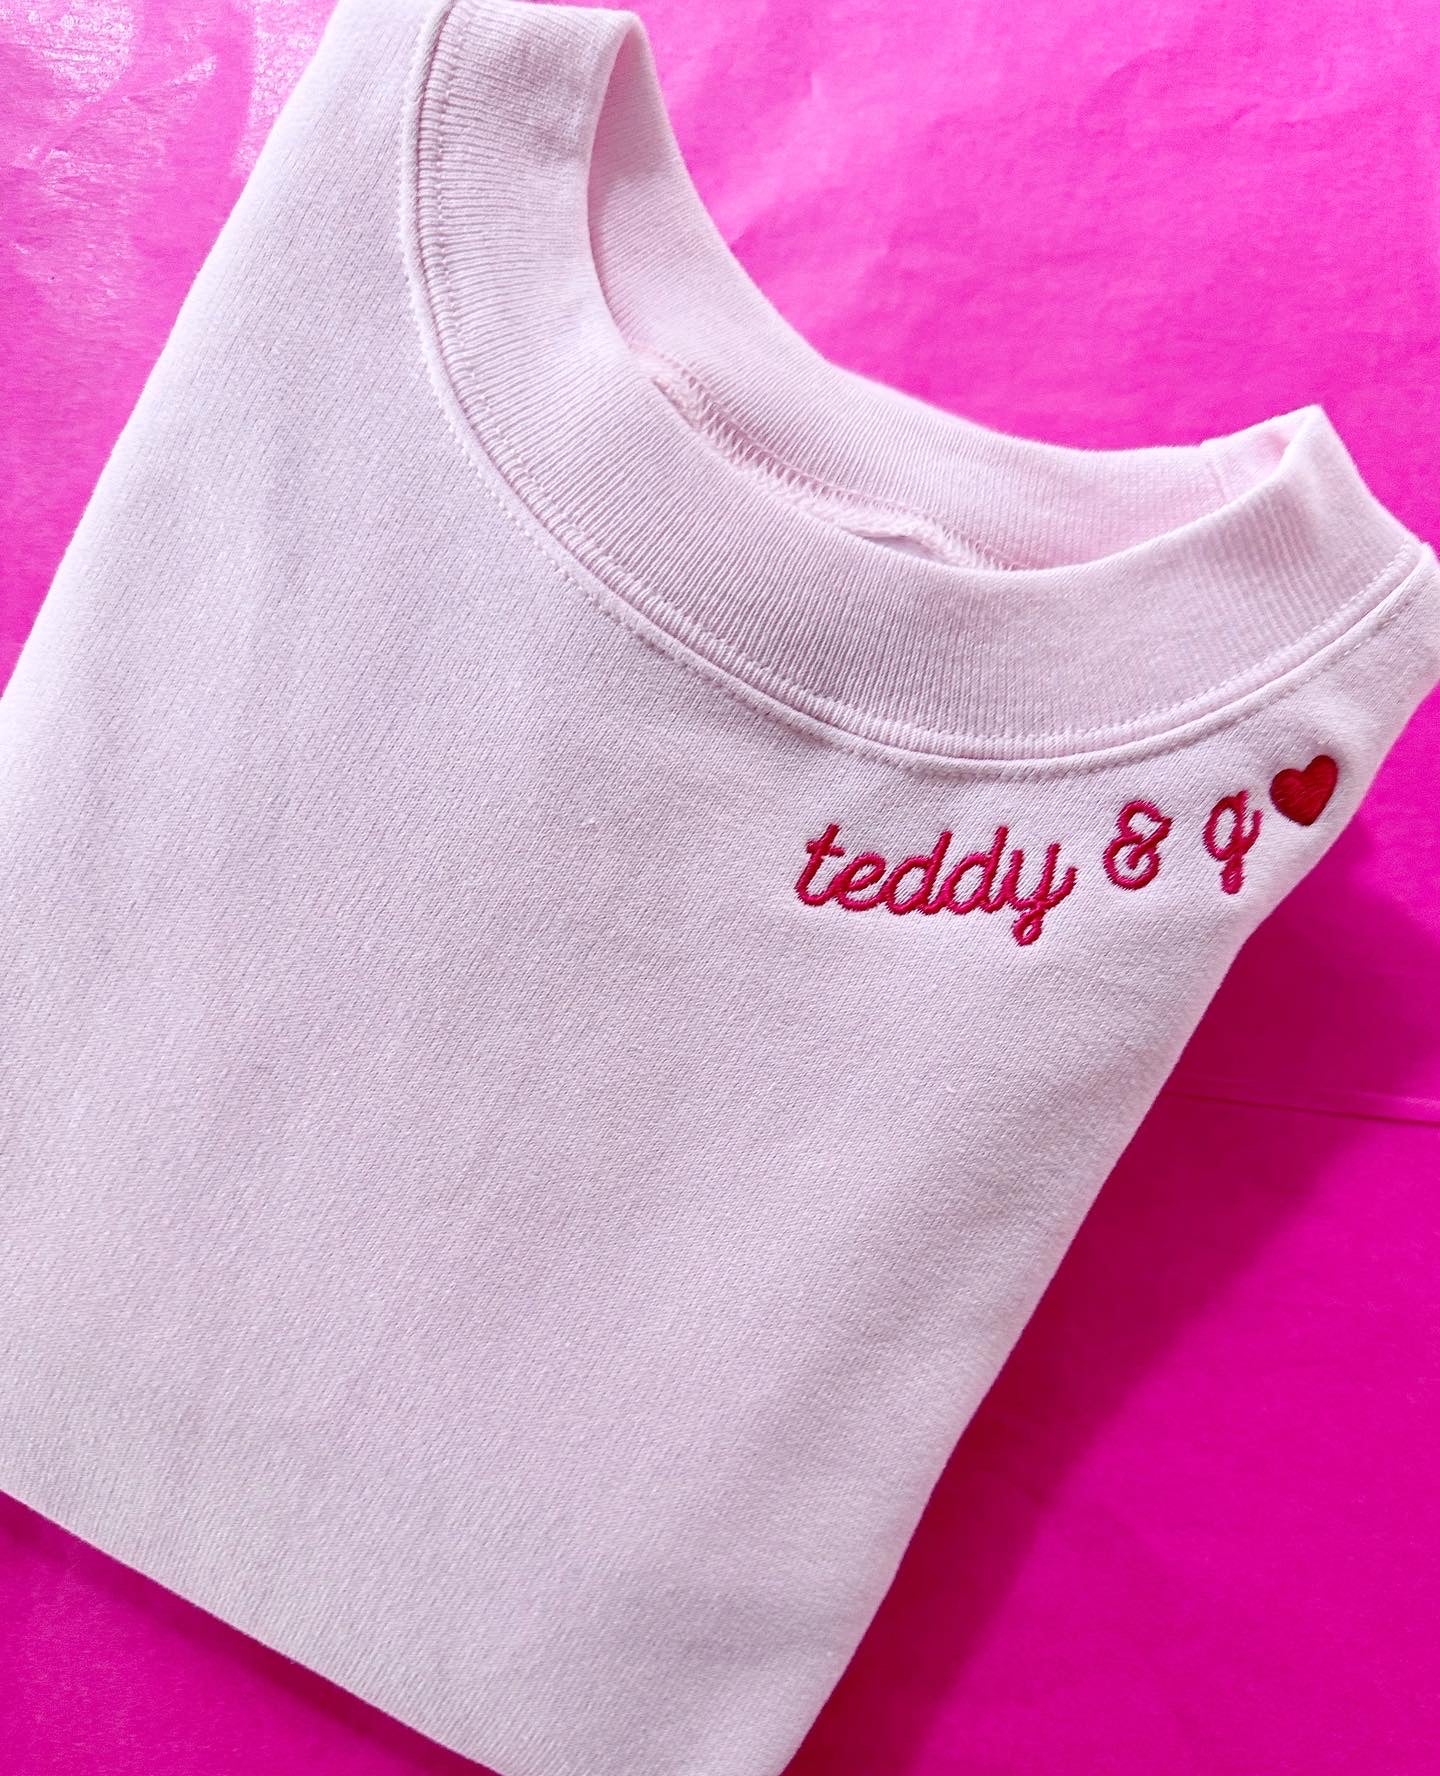 PINK WITH RED STITCH ♡ adult embroidered sweatshirt with heart